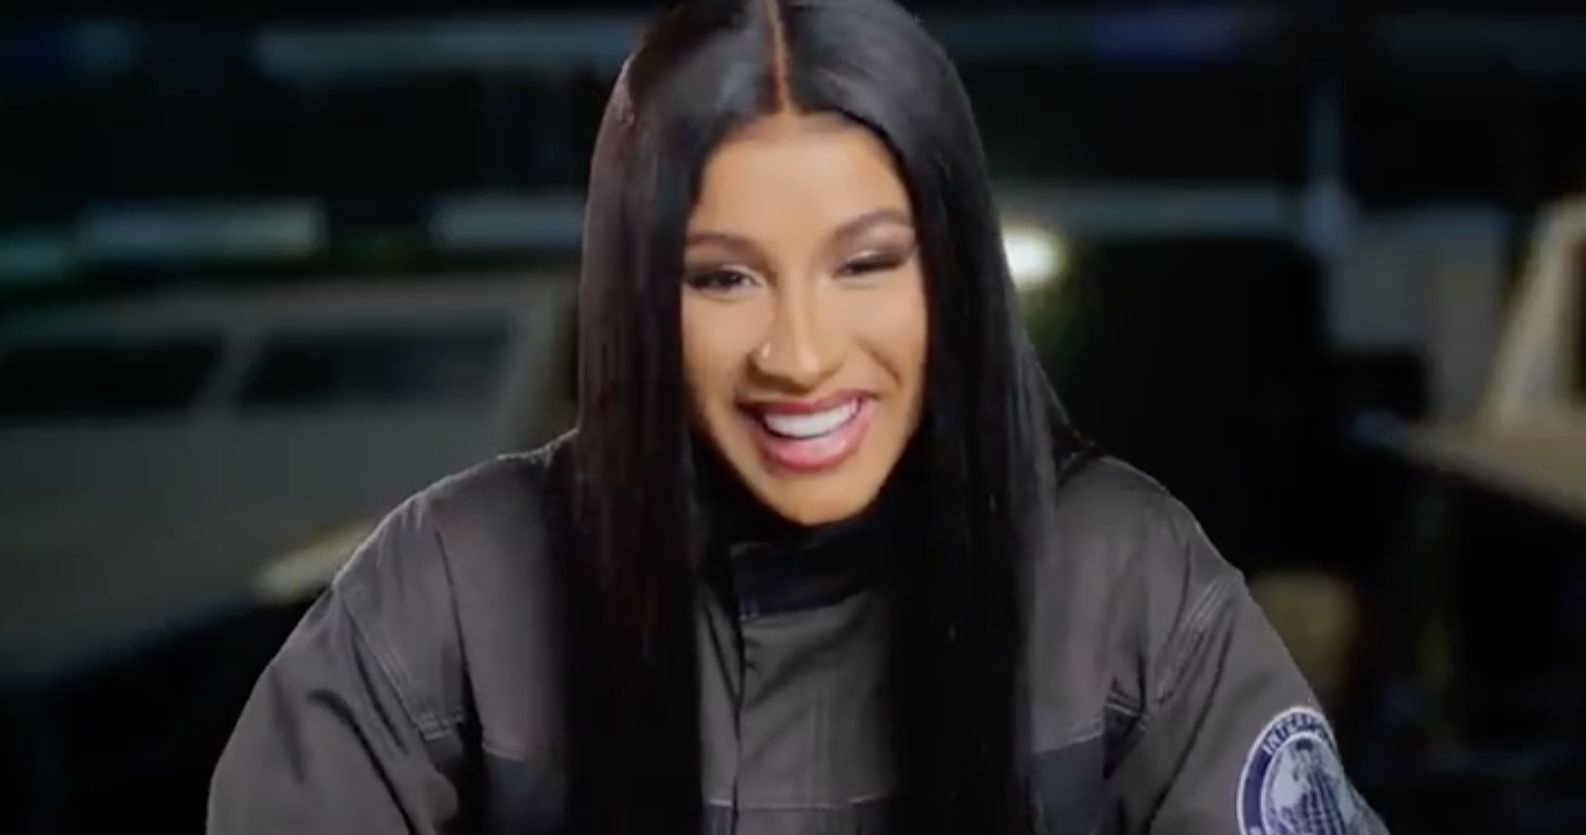 Cardi B Is an Action Star with 'Tricks Up Her Sleeve' in Fast and Furious 9 Sneak Peek